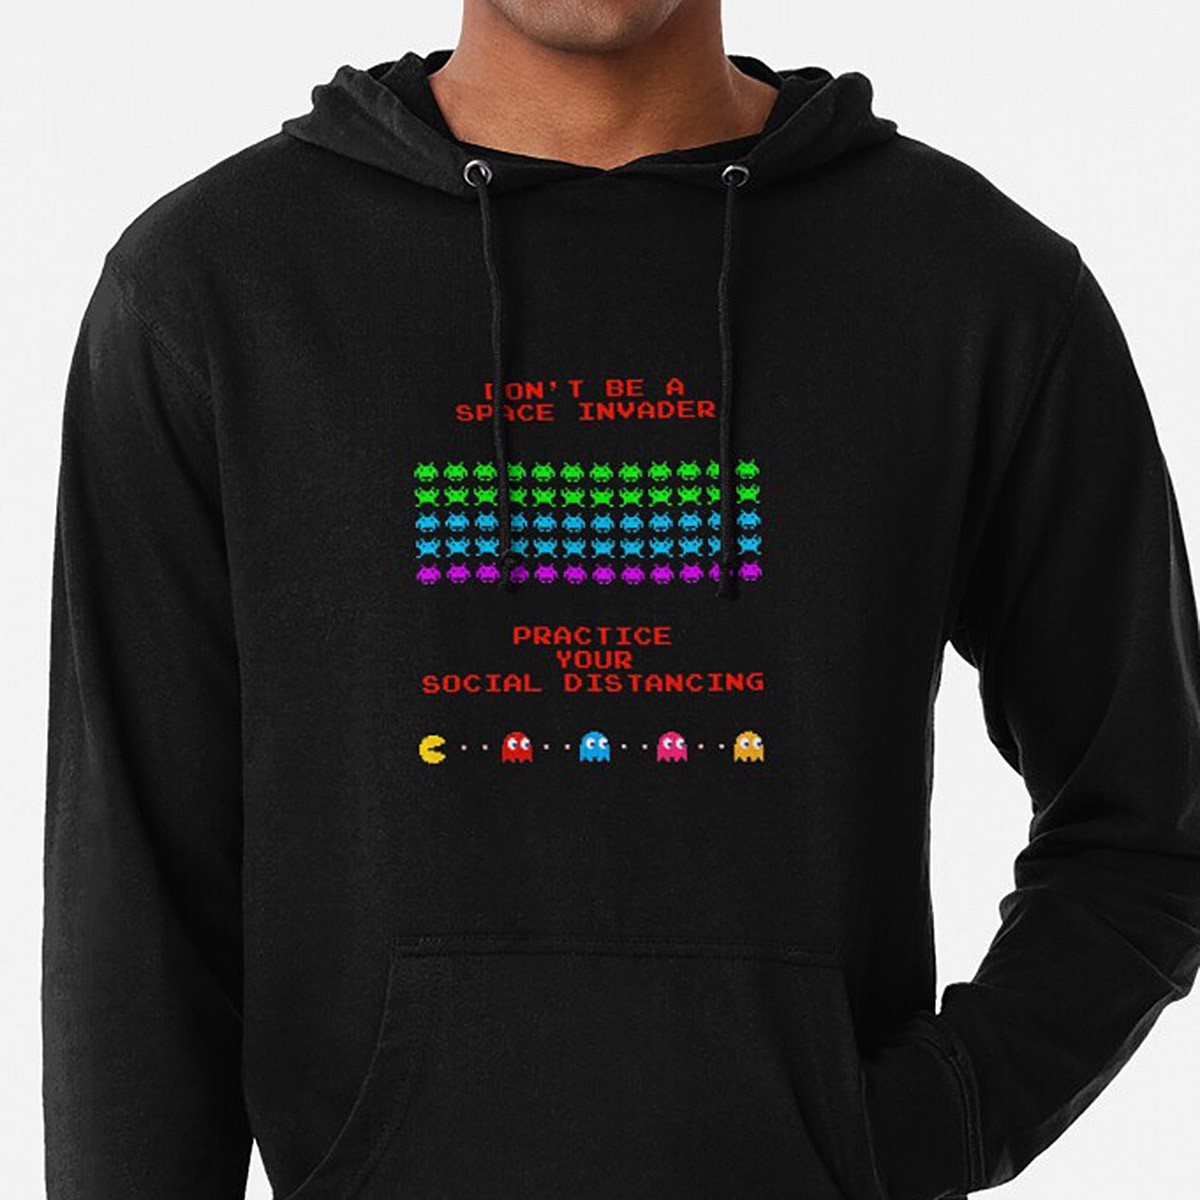 Don't be a Space Invader - Practice Social Distancing Lightweight Hoodie by NTK Apparel